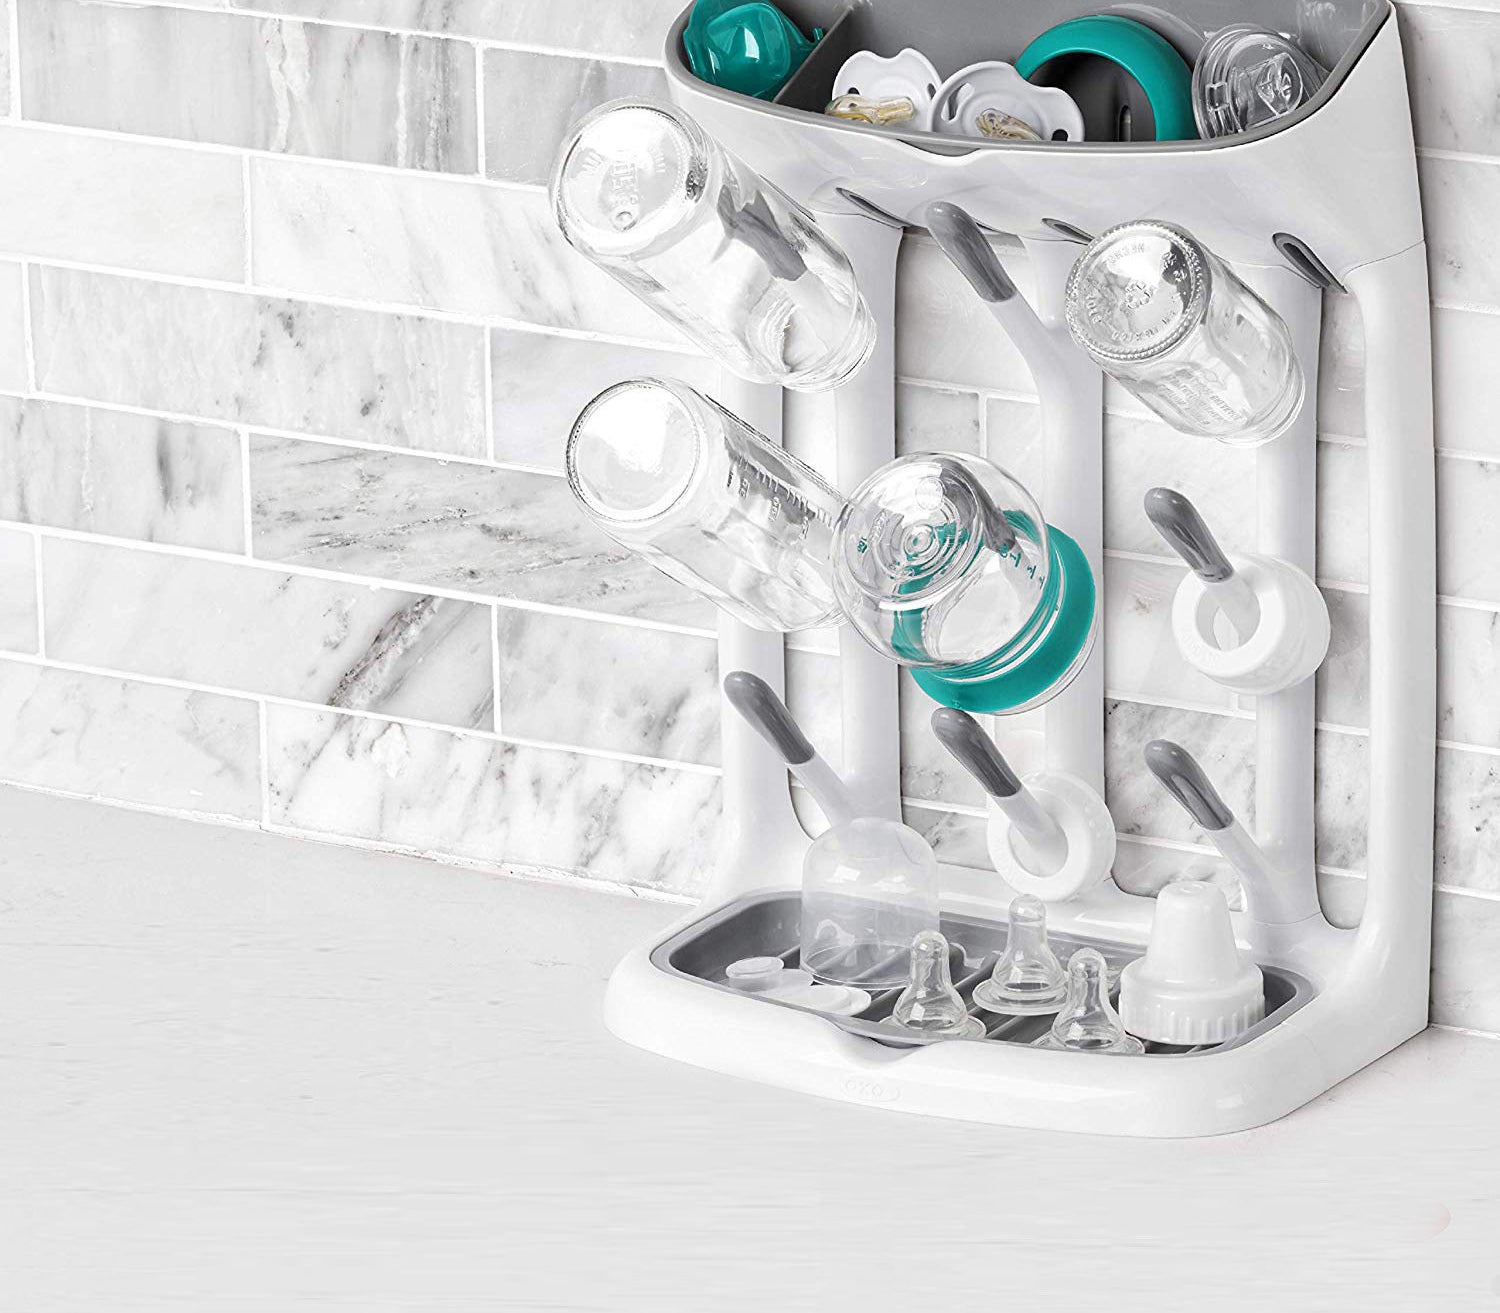 An upright dish rack with multiple hooks and a shelf above them The hooks have baby bottles hanging from them with pacifiers lying in the shelf